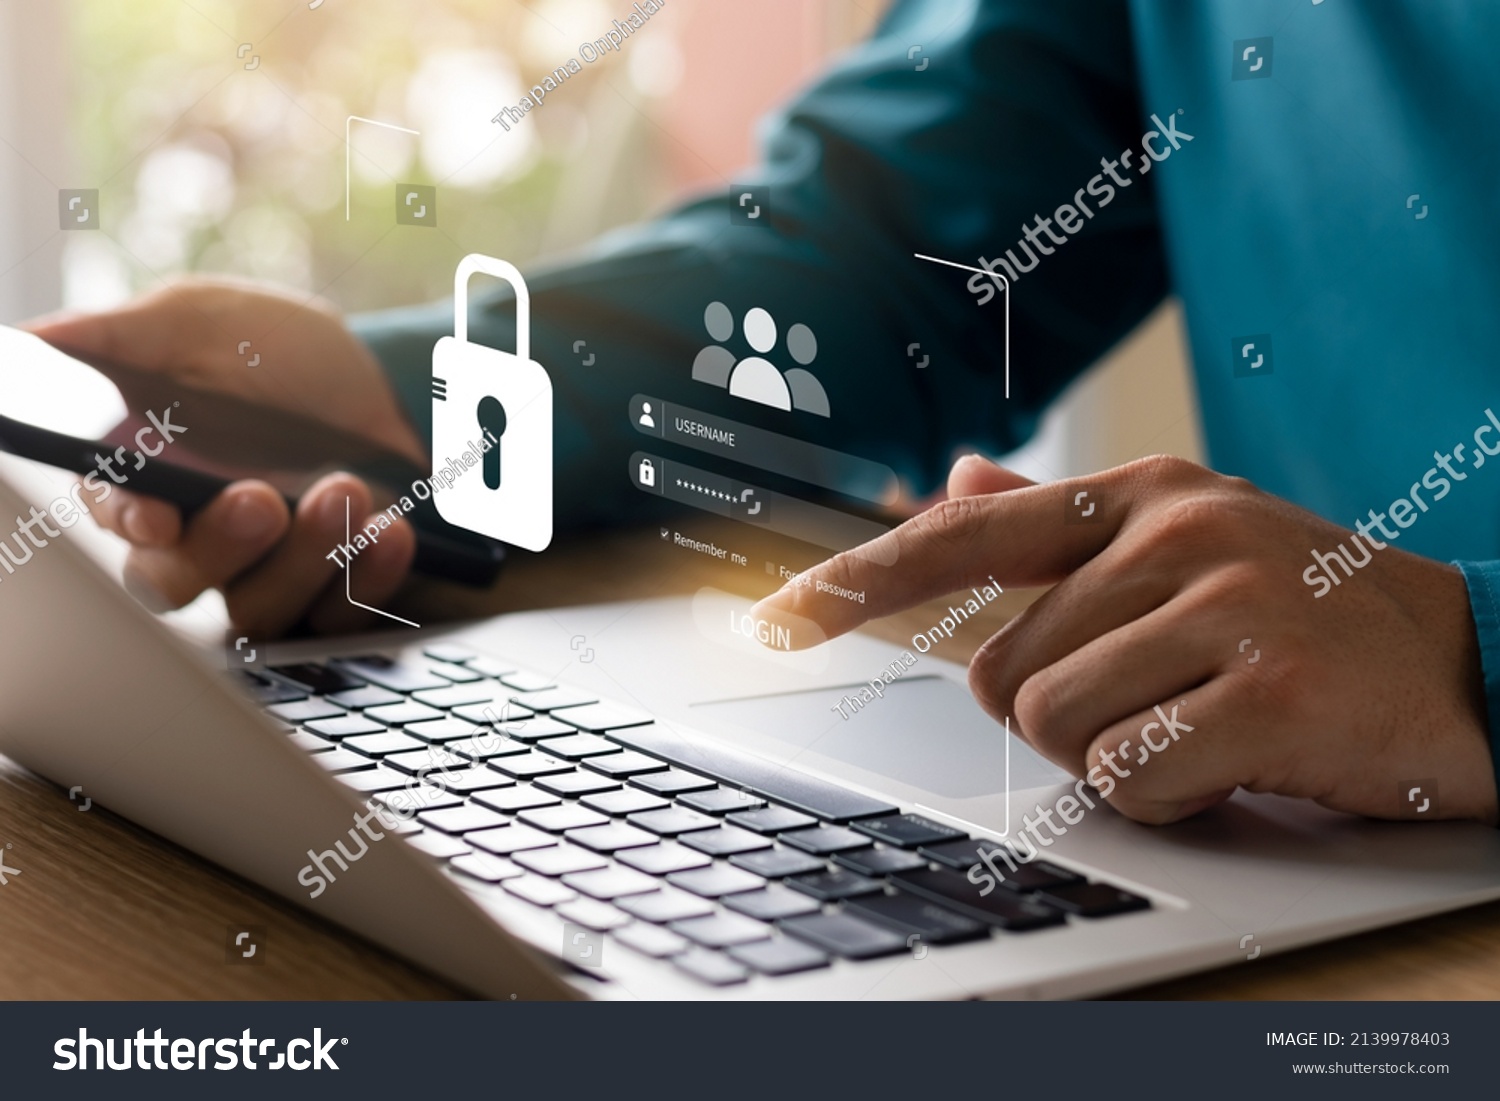 Cybersecurity and privacy concepts to protect data. Lock icon and internet network security technology. Businessmen protecting personal data on laptops and virtual interfaces. #2139978403